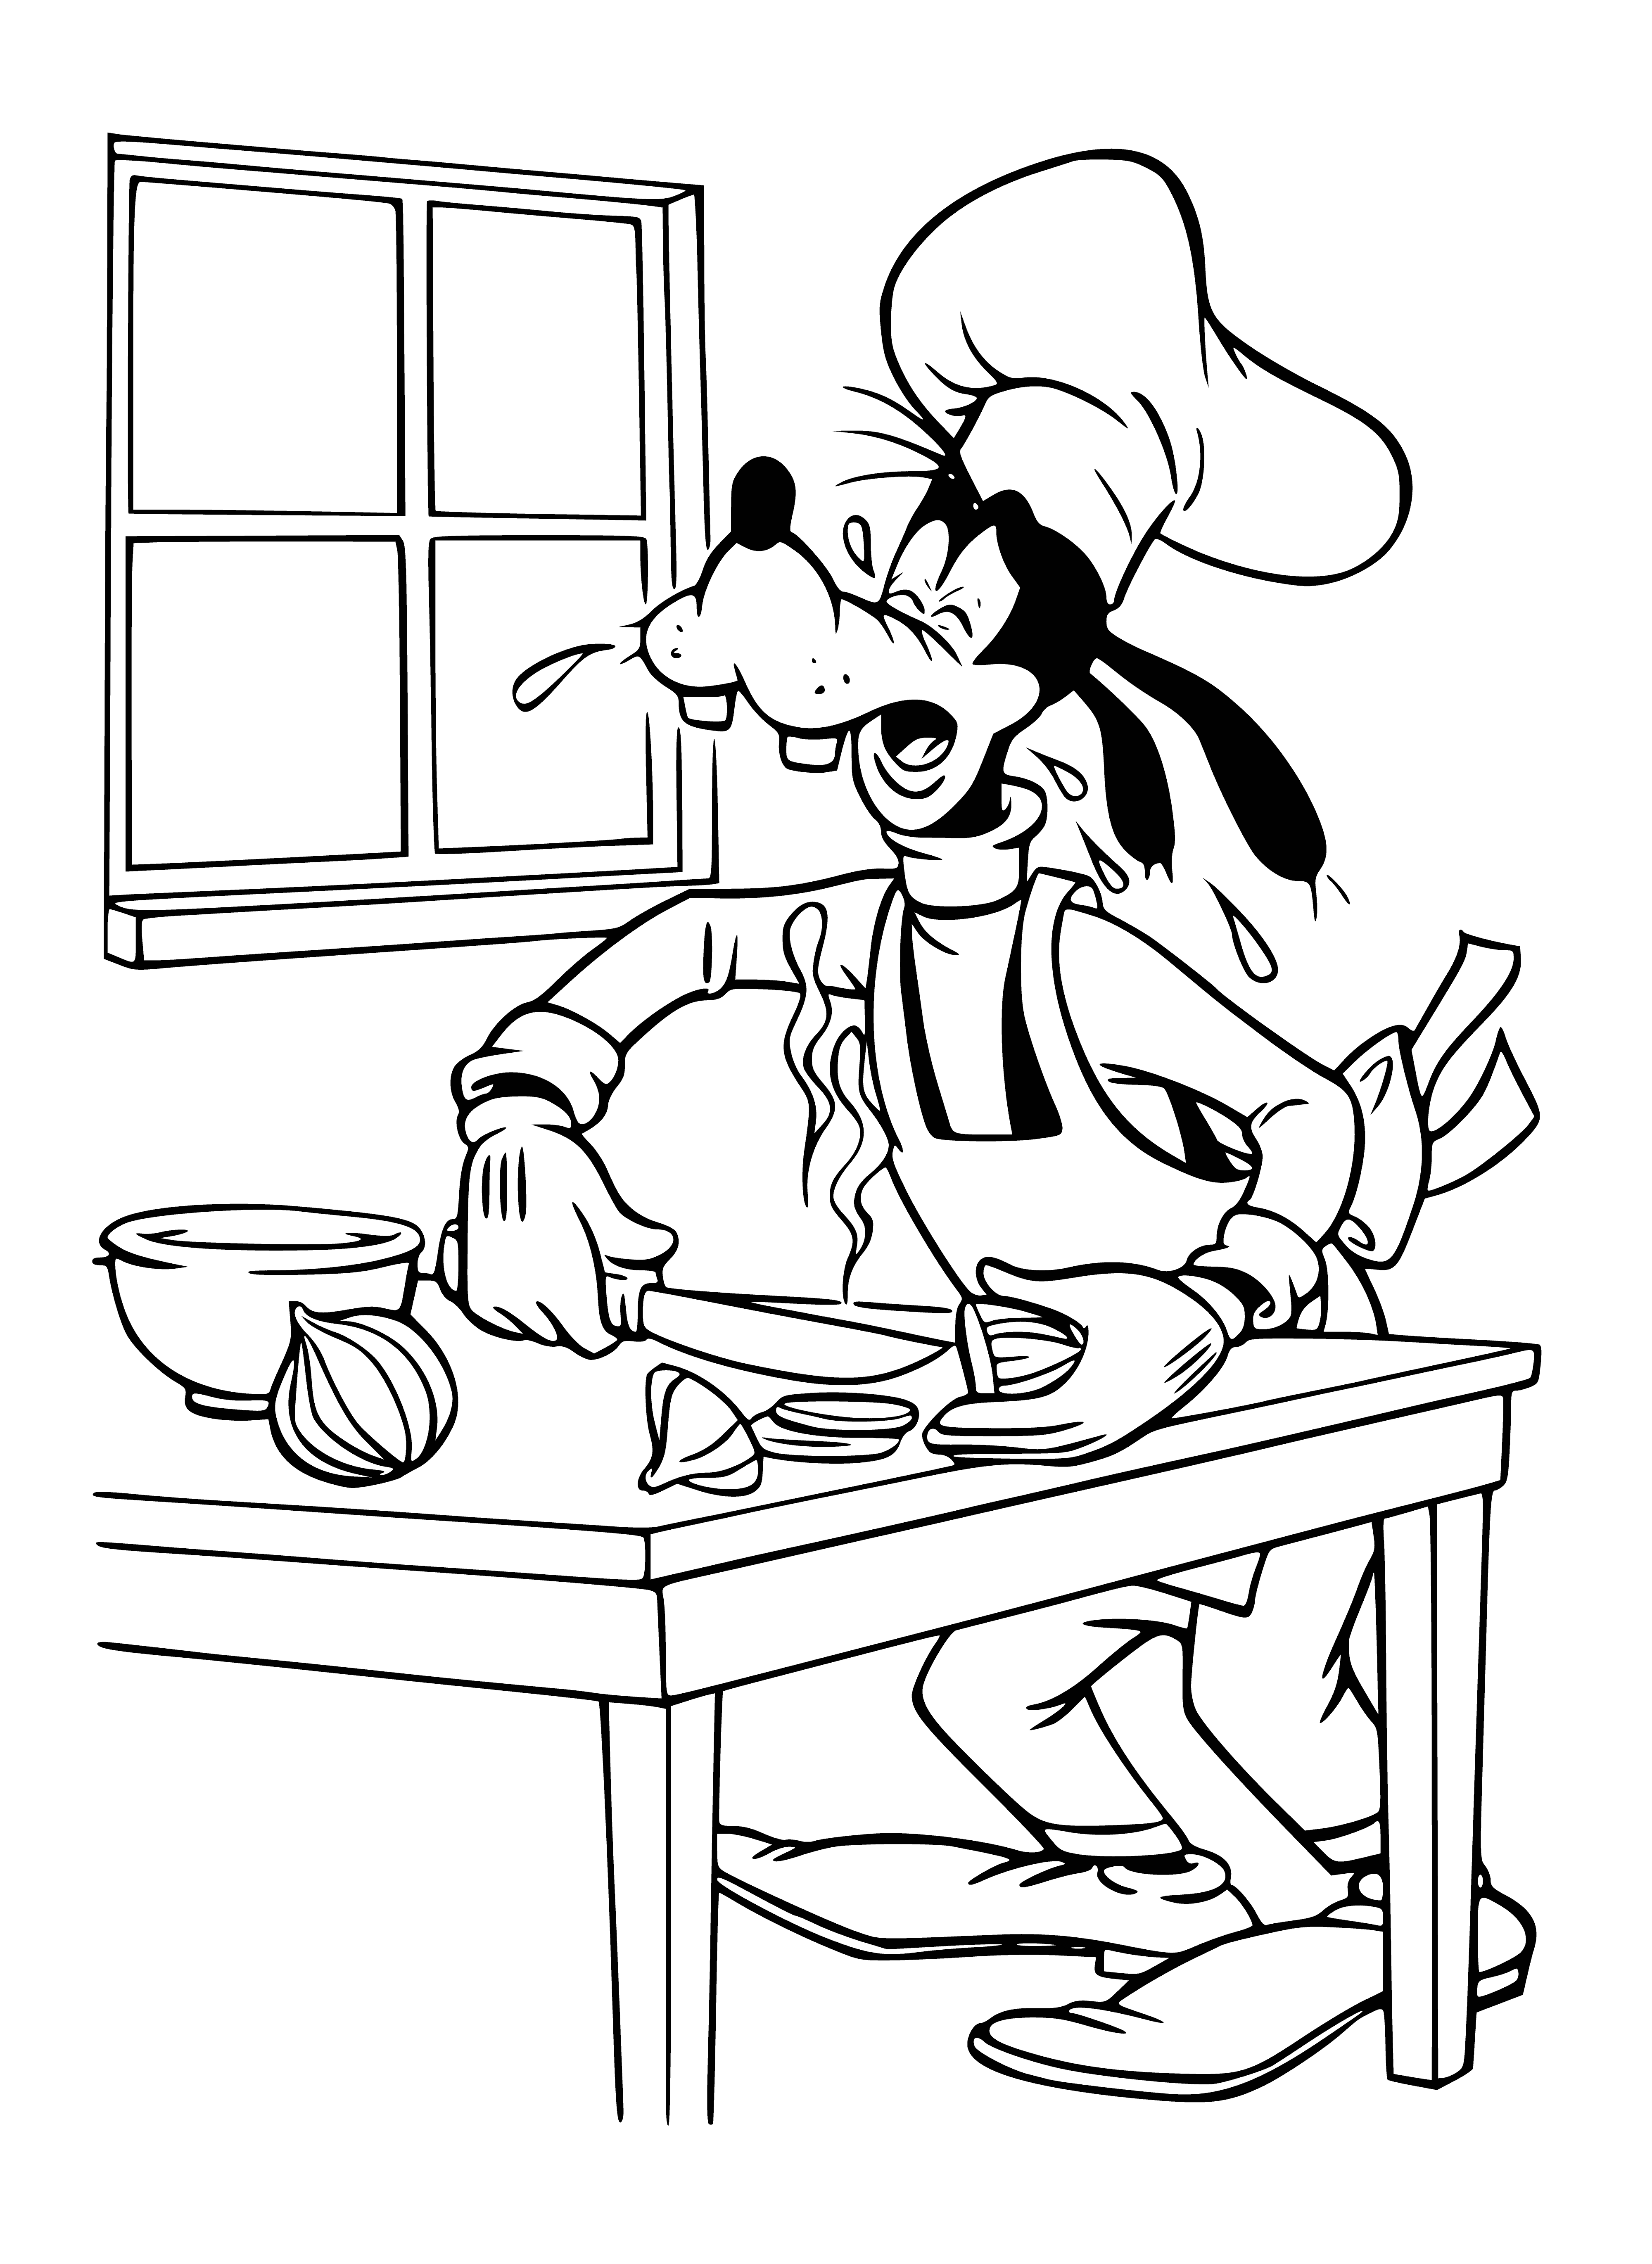 Cuts onions coloring page